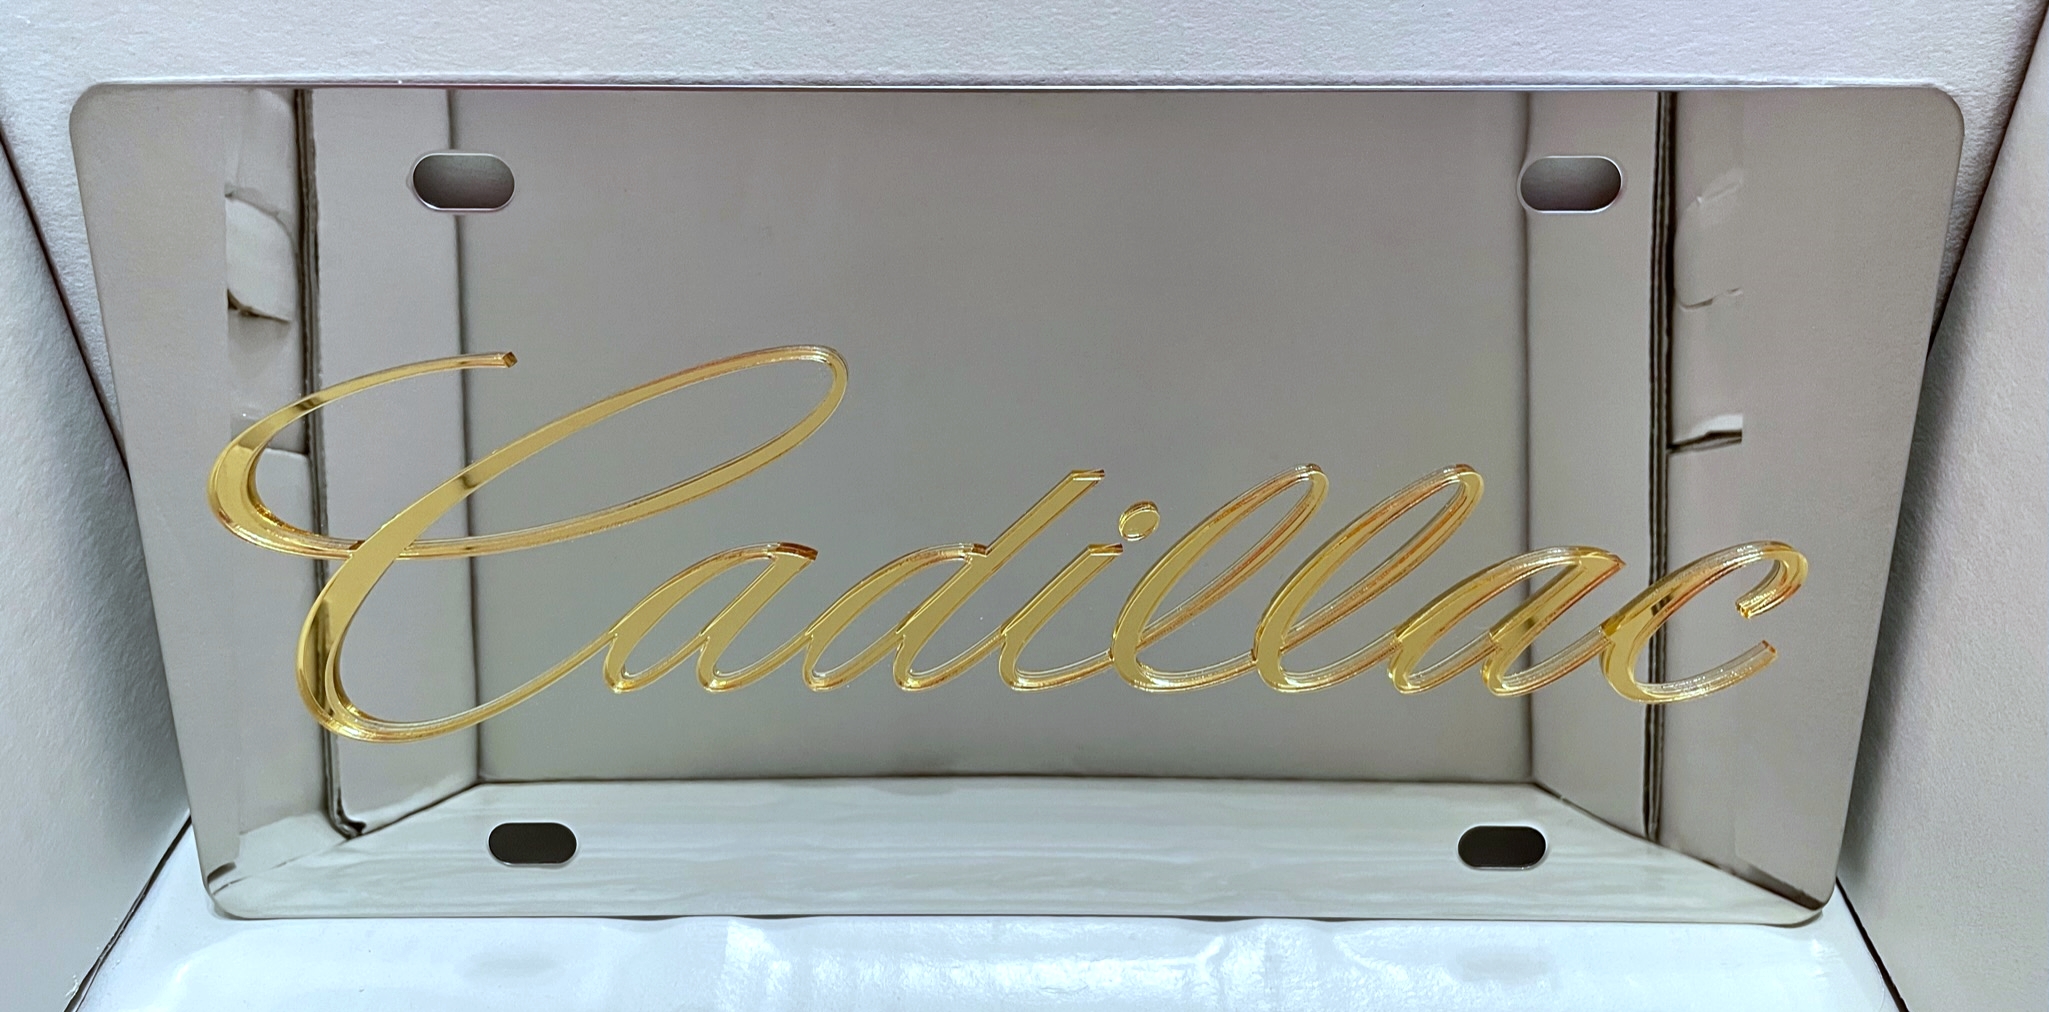 Cadillac script gold stainless steel vanity pla...